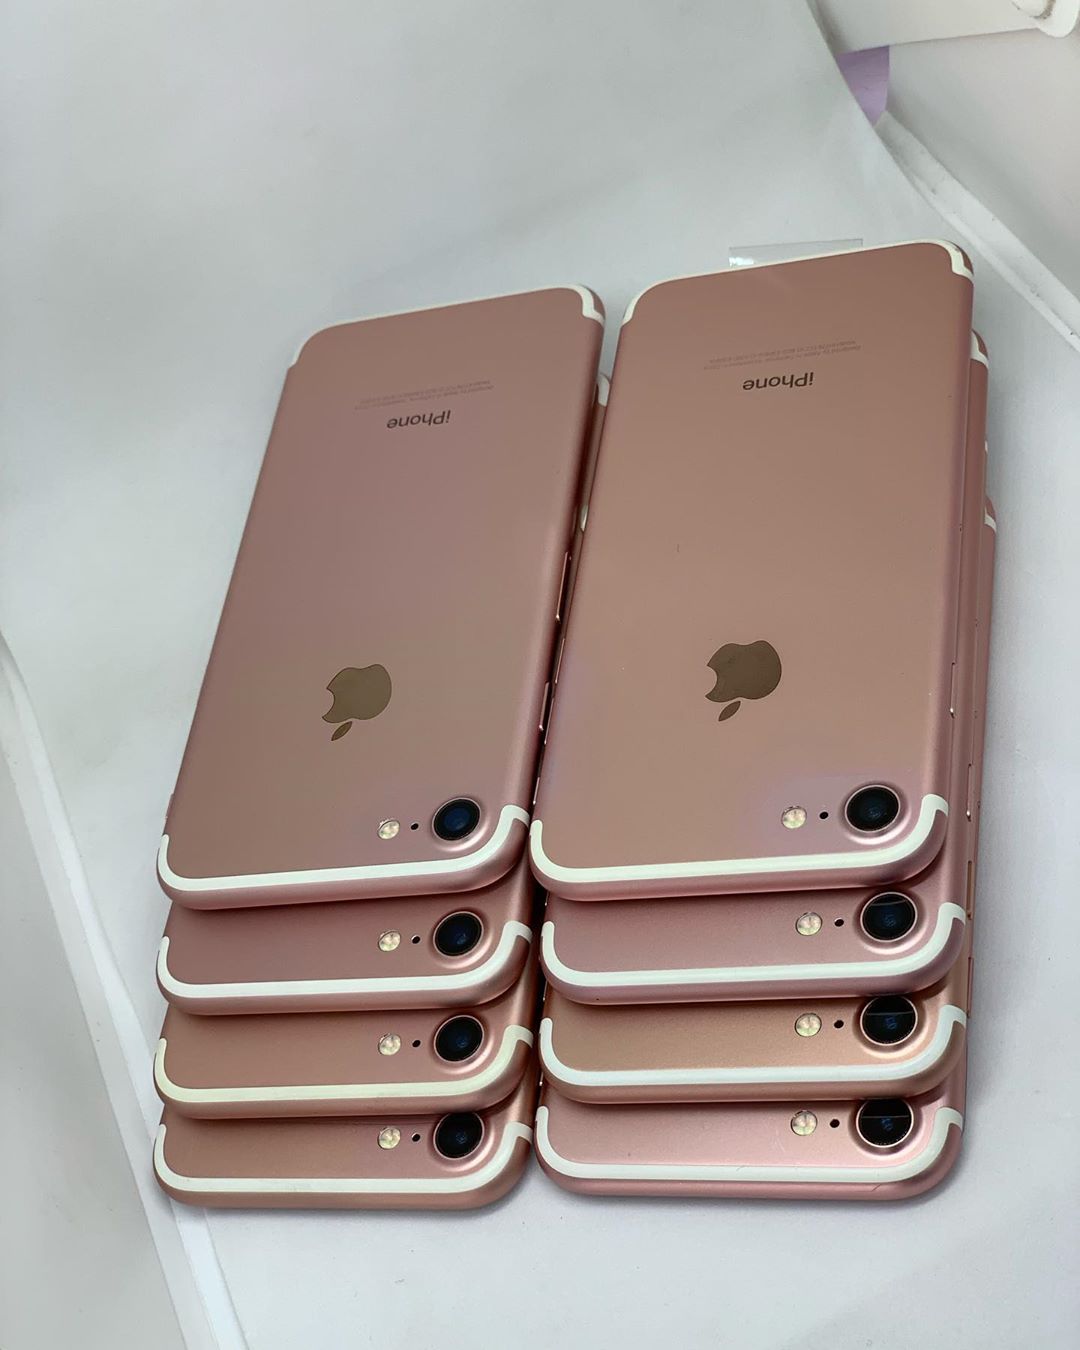 Thread For Clean Uk Used Iphones Best Prices You Can Ever Get In Lagos Phone Internet Market Nigeria